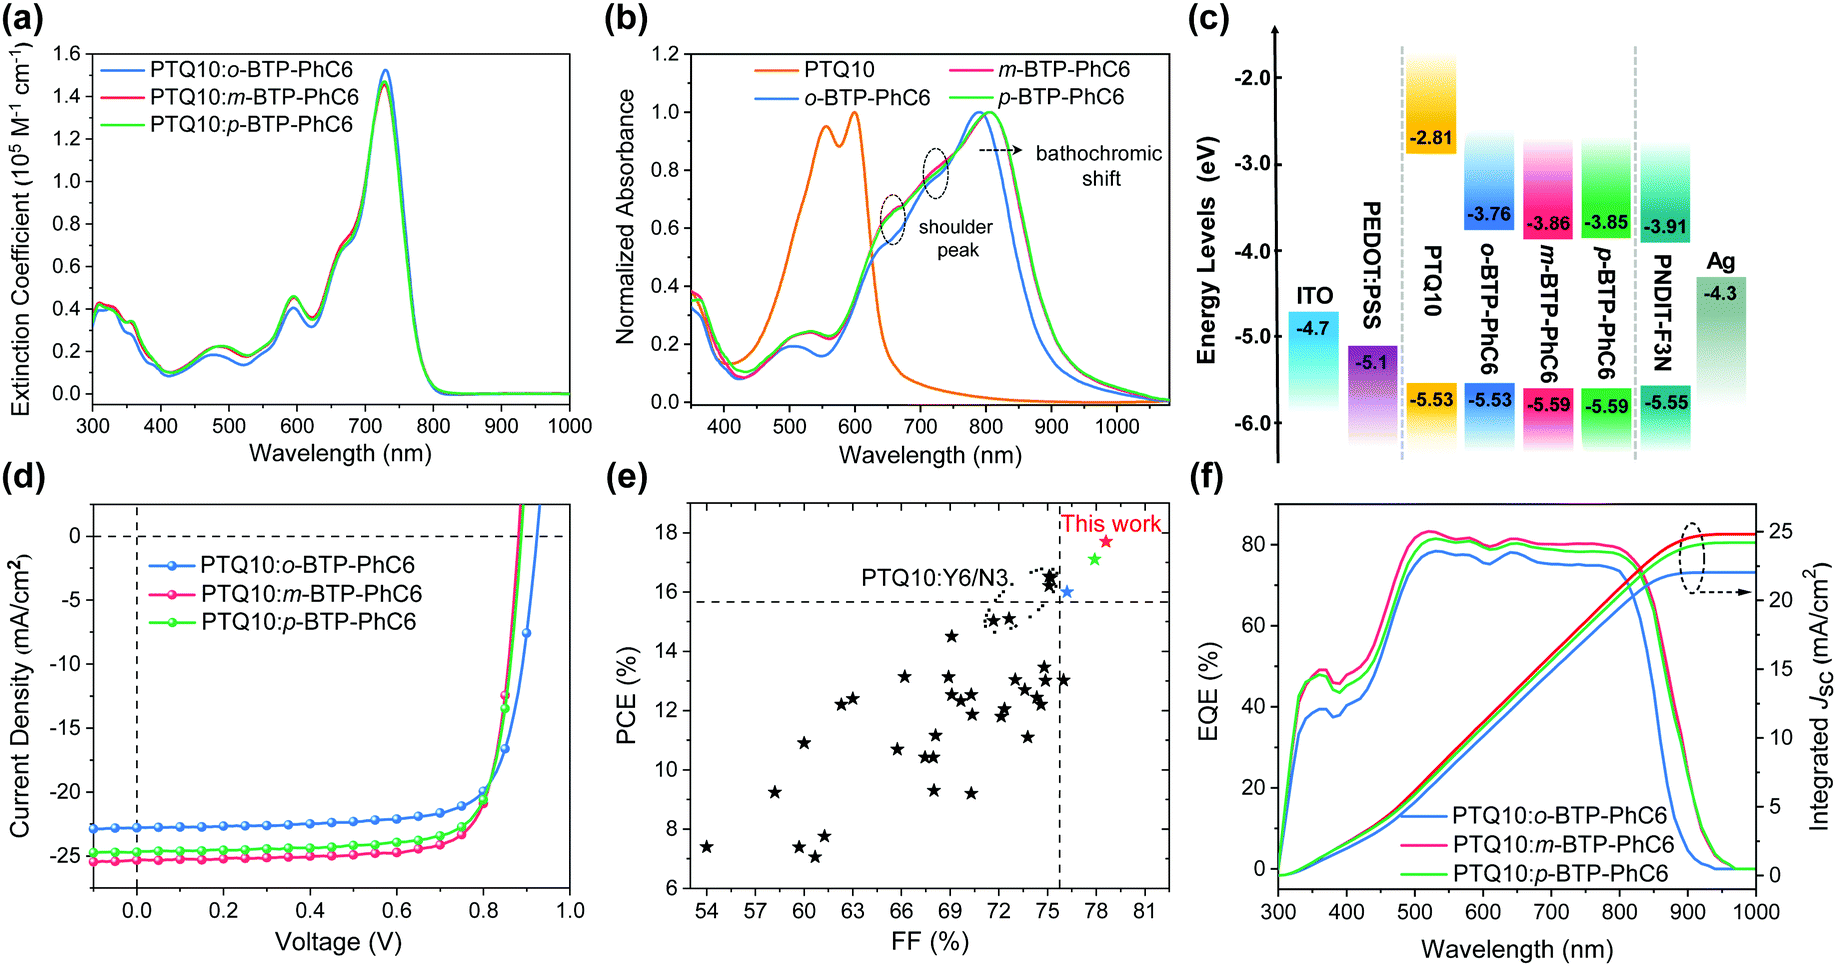 Fine Tuning Of Side Chain Orientations On Nonfullerene Acceptors Enables Organic Solar Cells With 17 7 Efficiency Energy Environmental Science Rsc Publishing Doi 10 1039 D0eeh